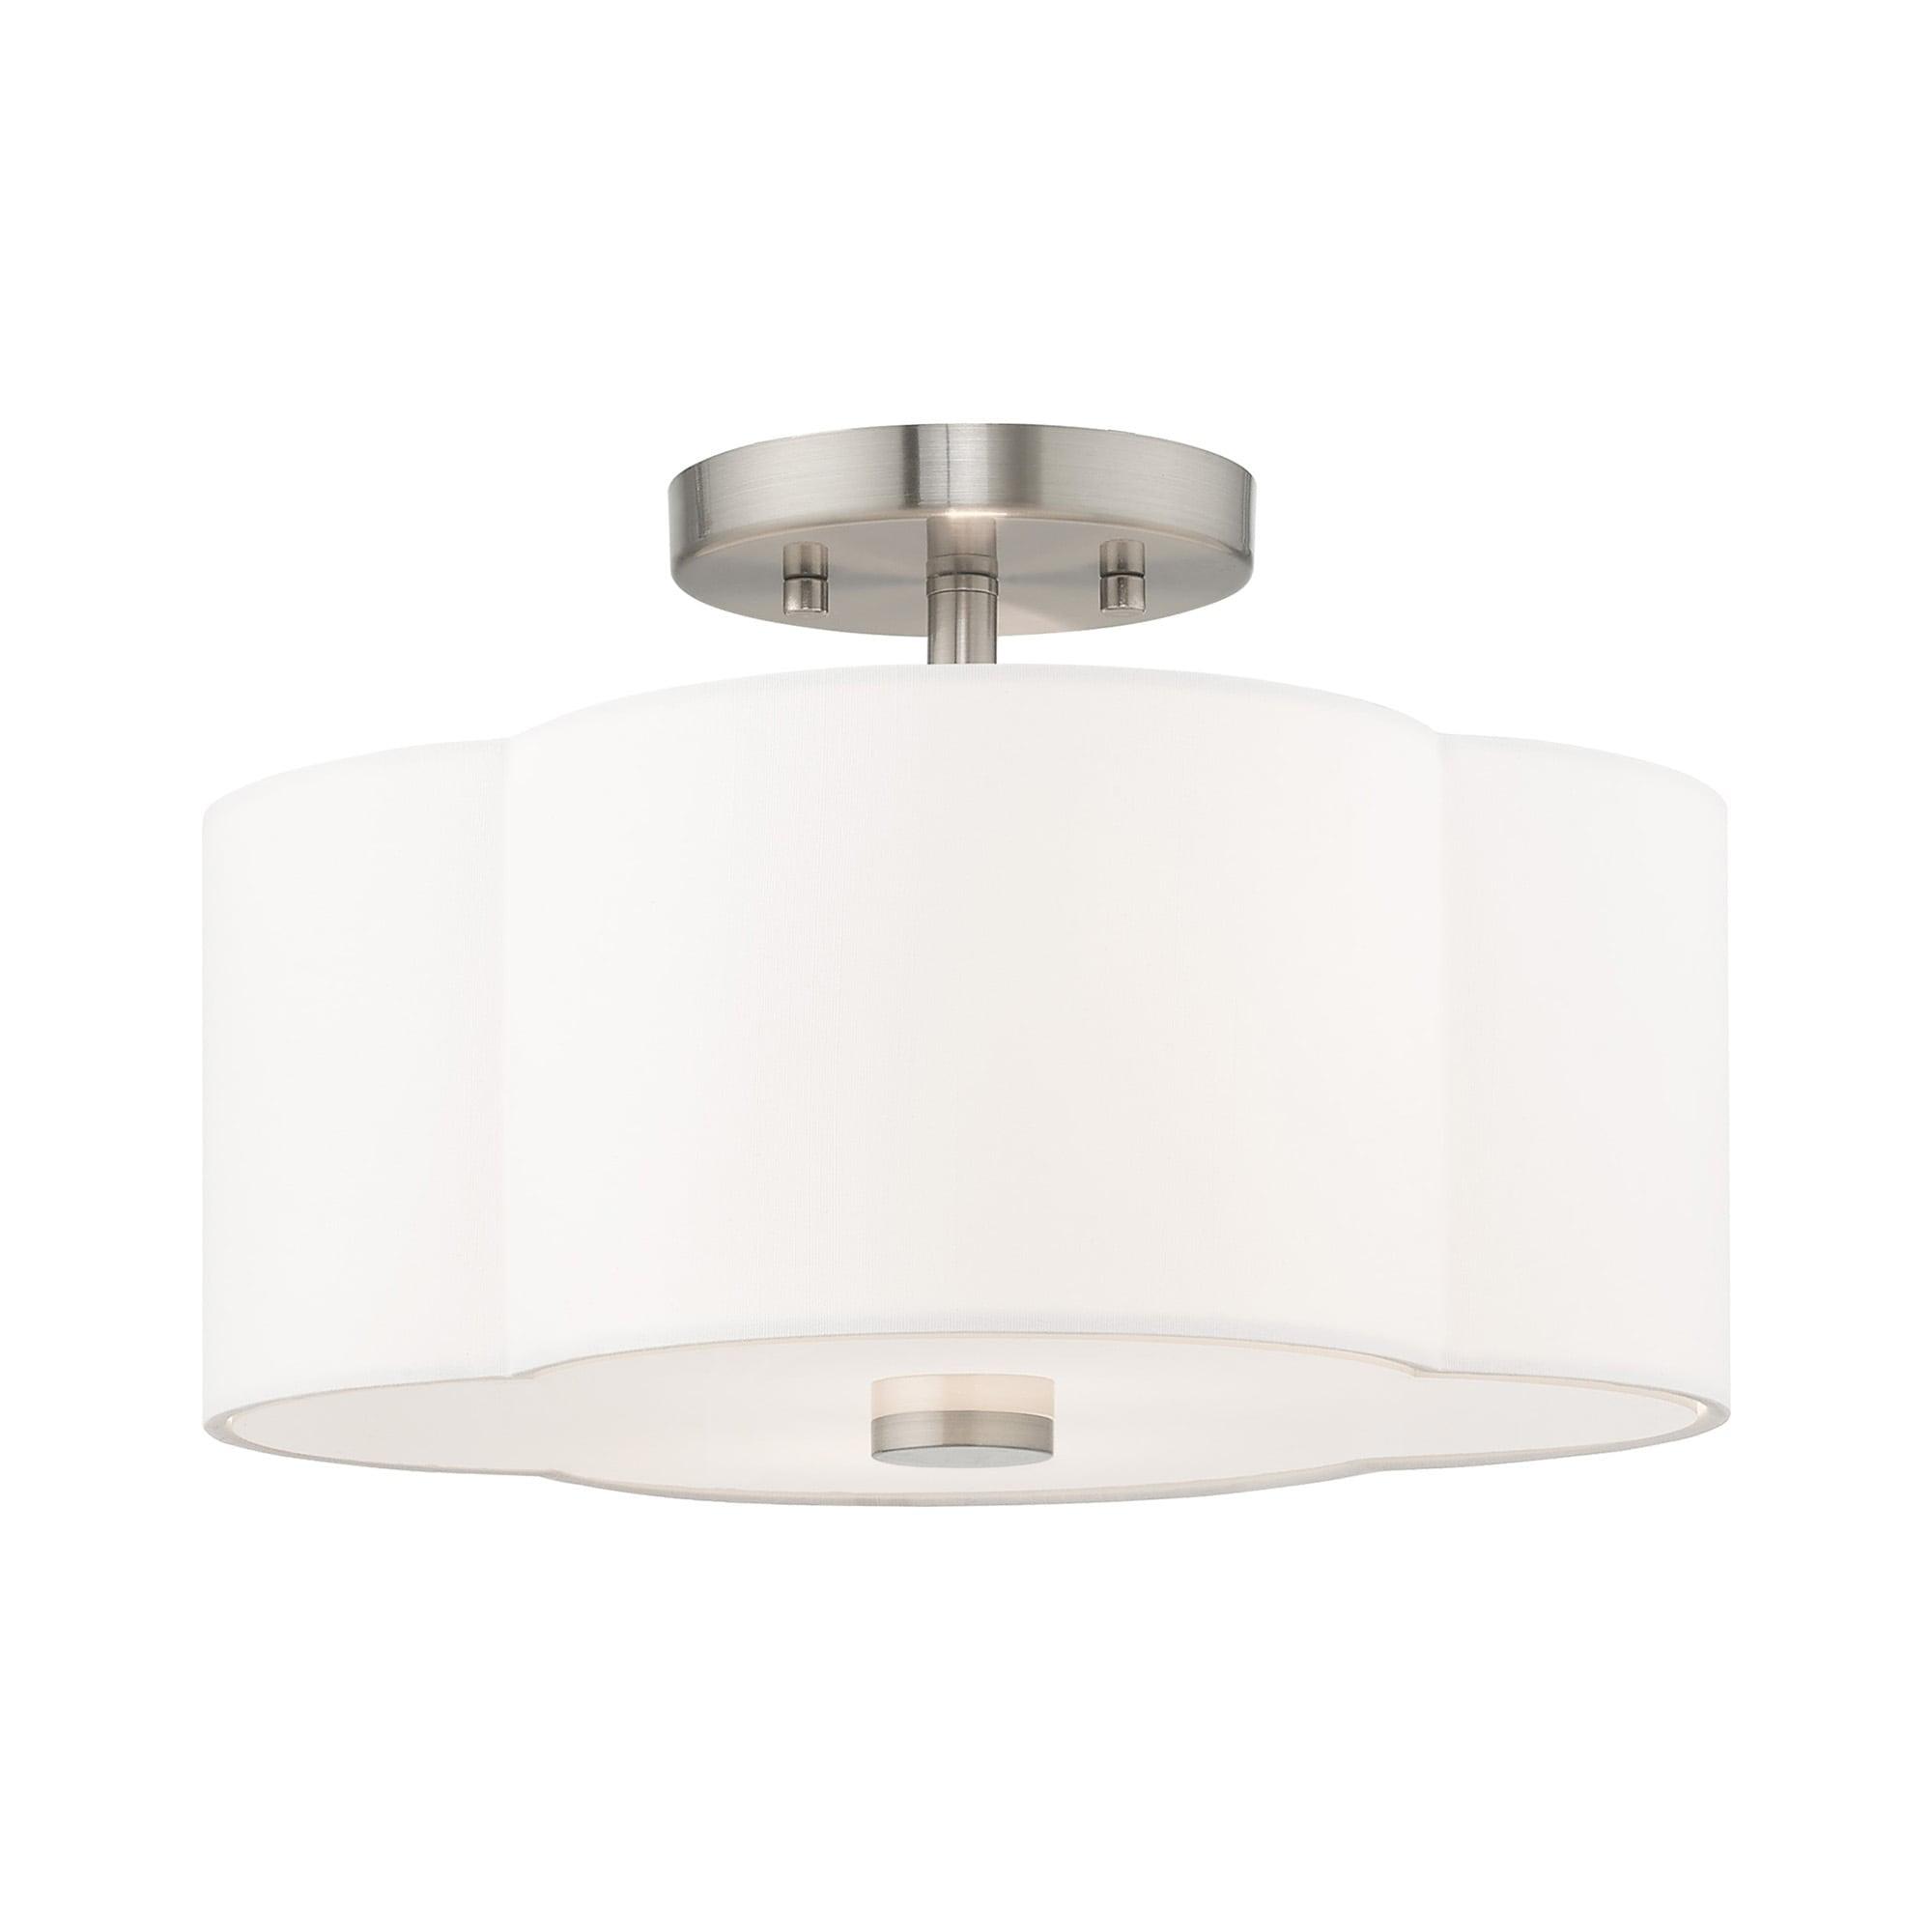 Chelsea Brushed Nickel 2-Light Indoor/Outdoor Flush Mount with Off-White Shade